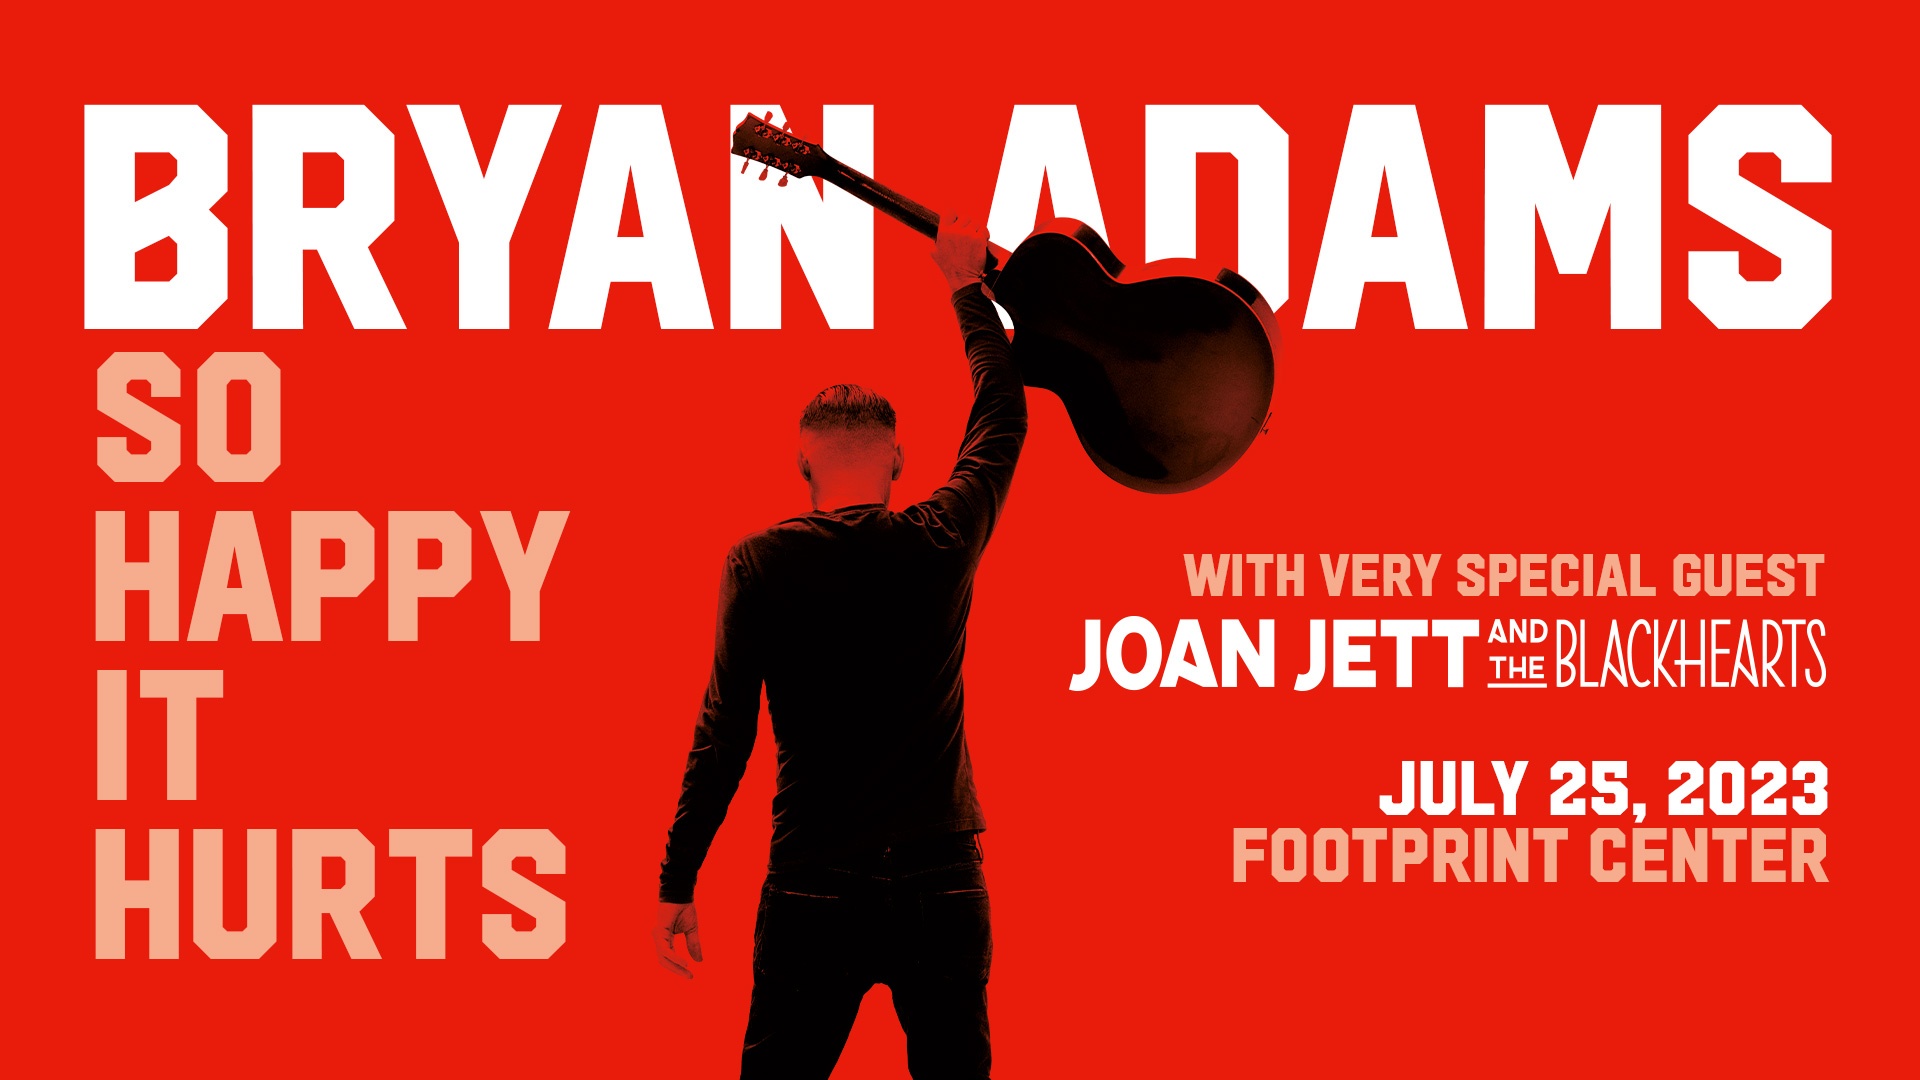 Bryan Adams - So Happy It Hurts | Special guest Joan Jett and the Blackhearts | July 25, 2023 at 7:30pm at Footprint Center